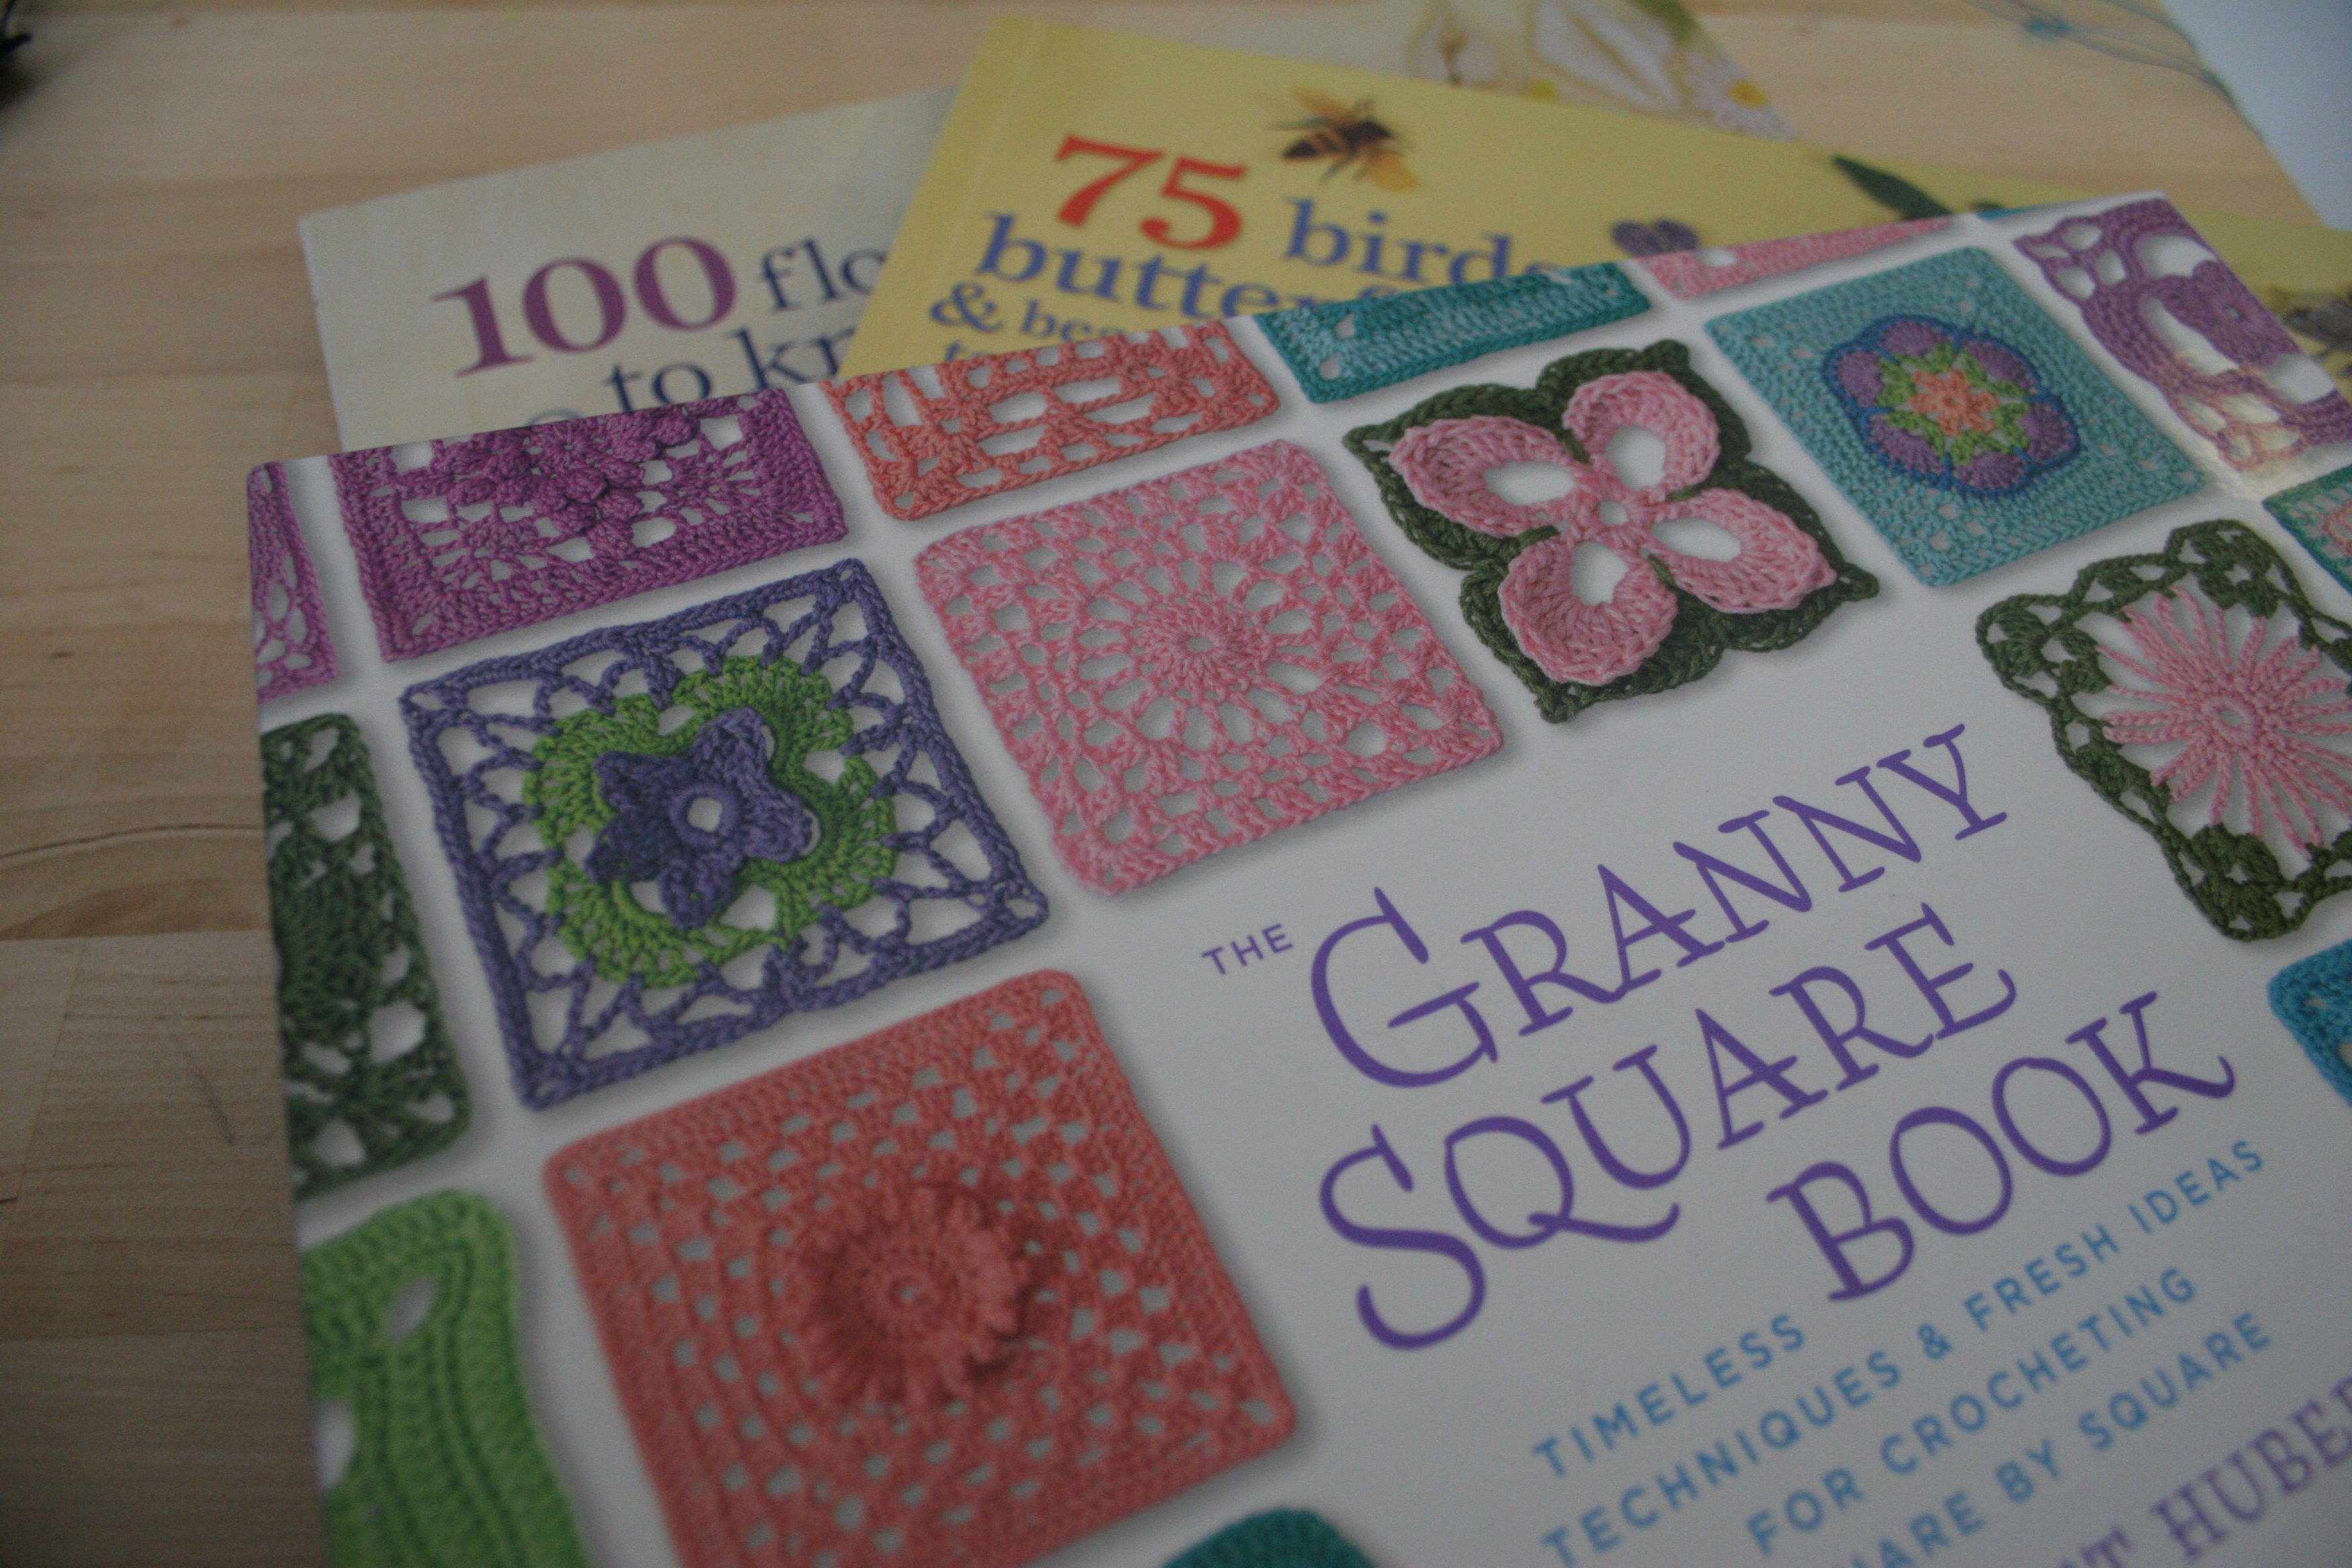 The Granny Square Book by Margaret Hubert